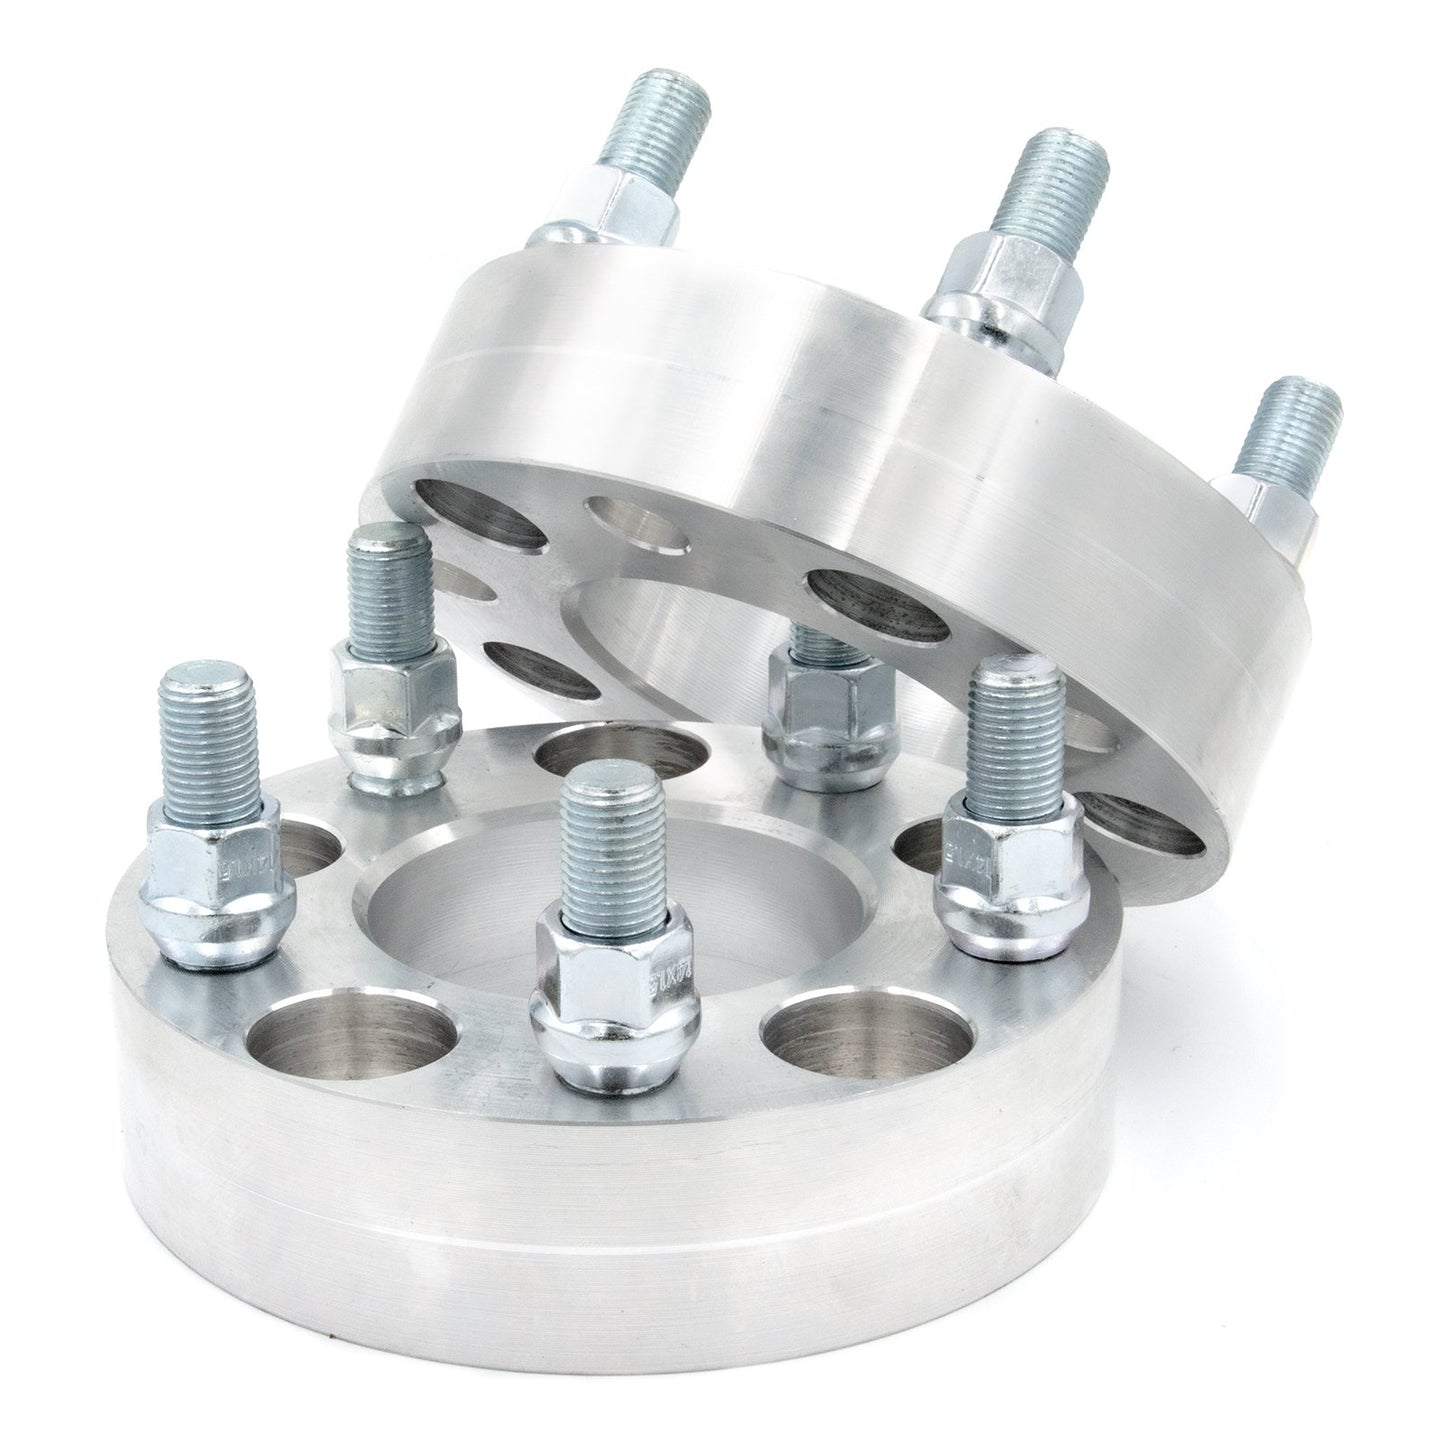 5x4.75" to 5x4.25" Wheel Spacer/Adapter - Thickness: 3/4"- 4"